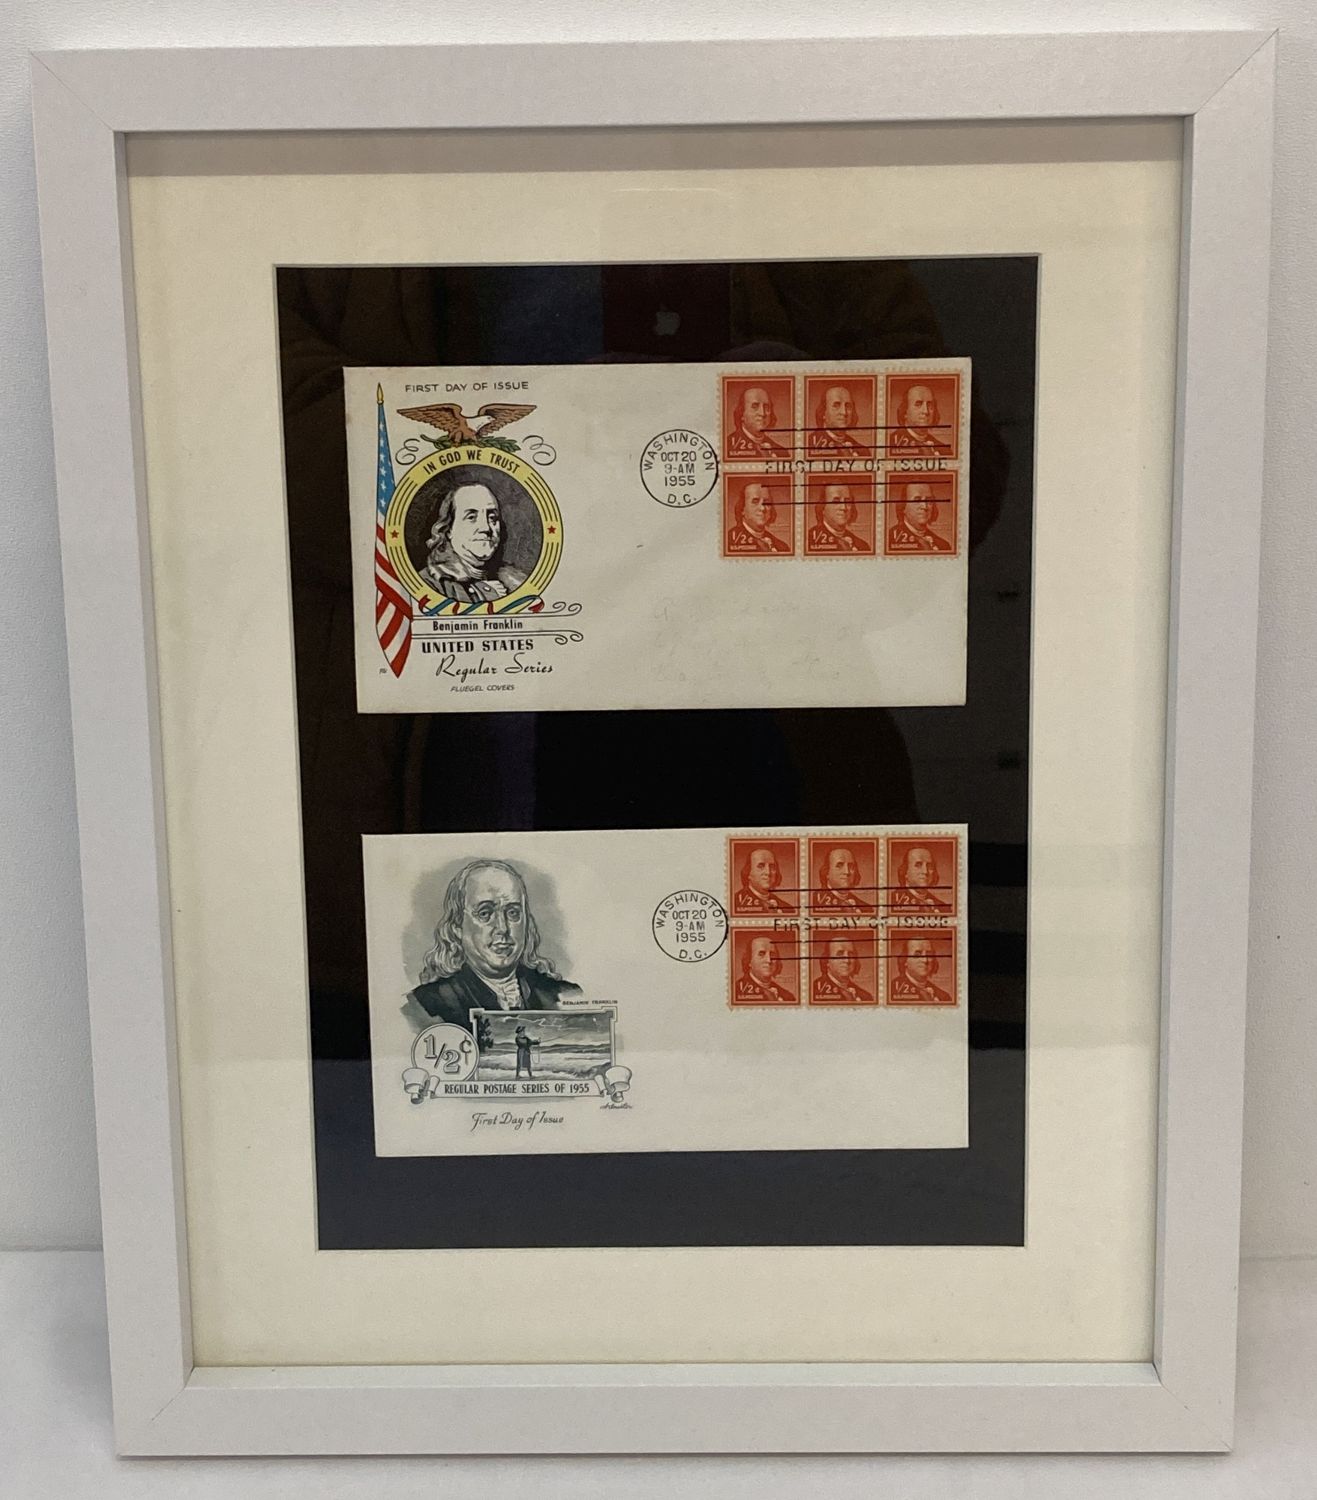 2 1955 American first day covers depicting Benjamin Franklin framed and glazed.